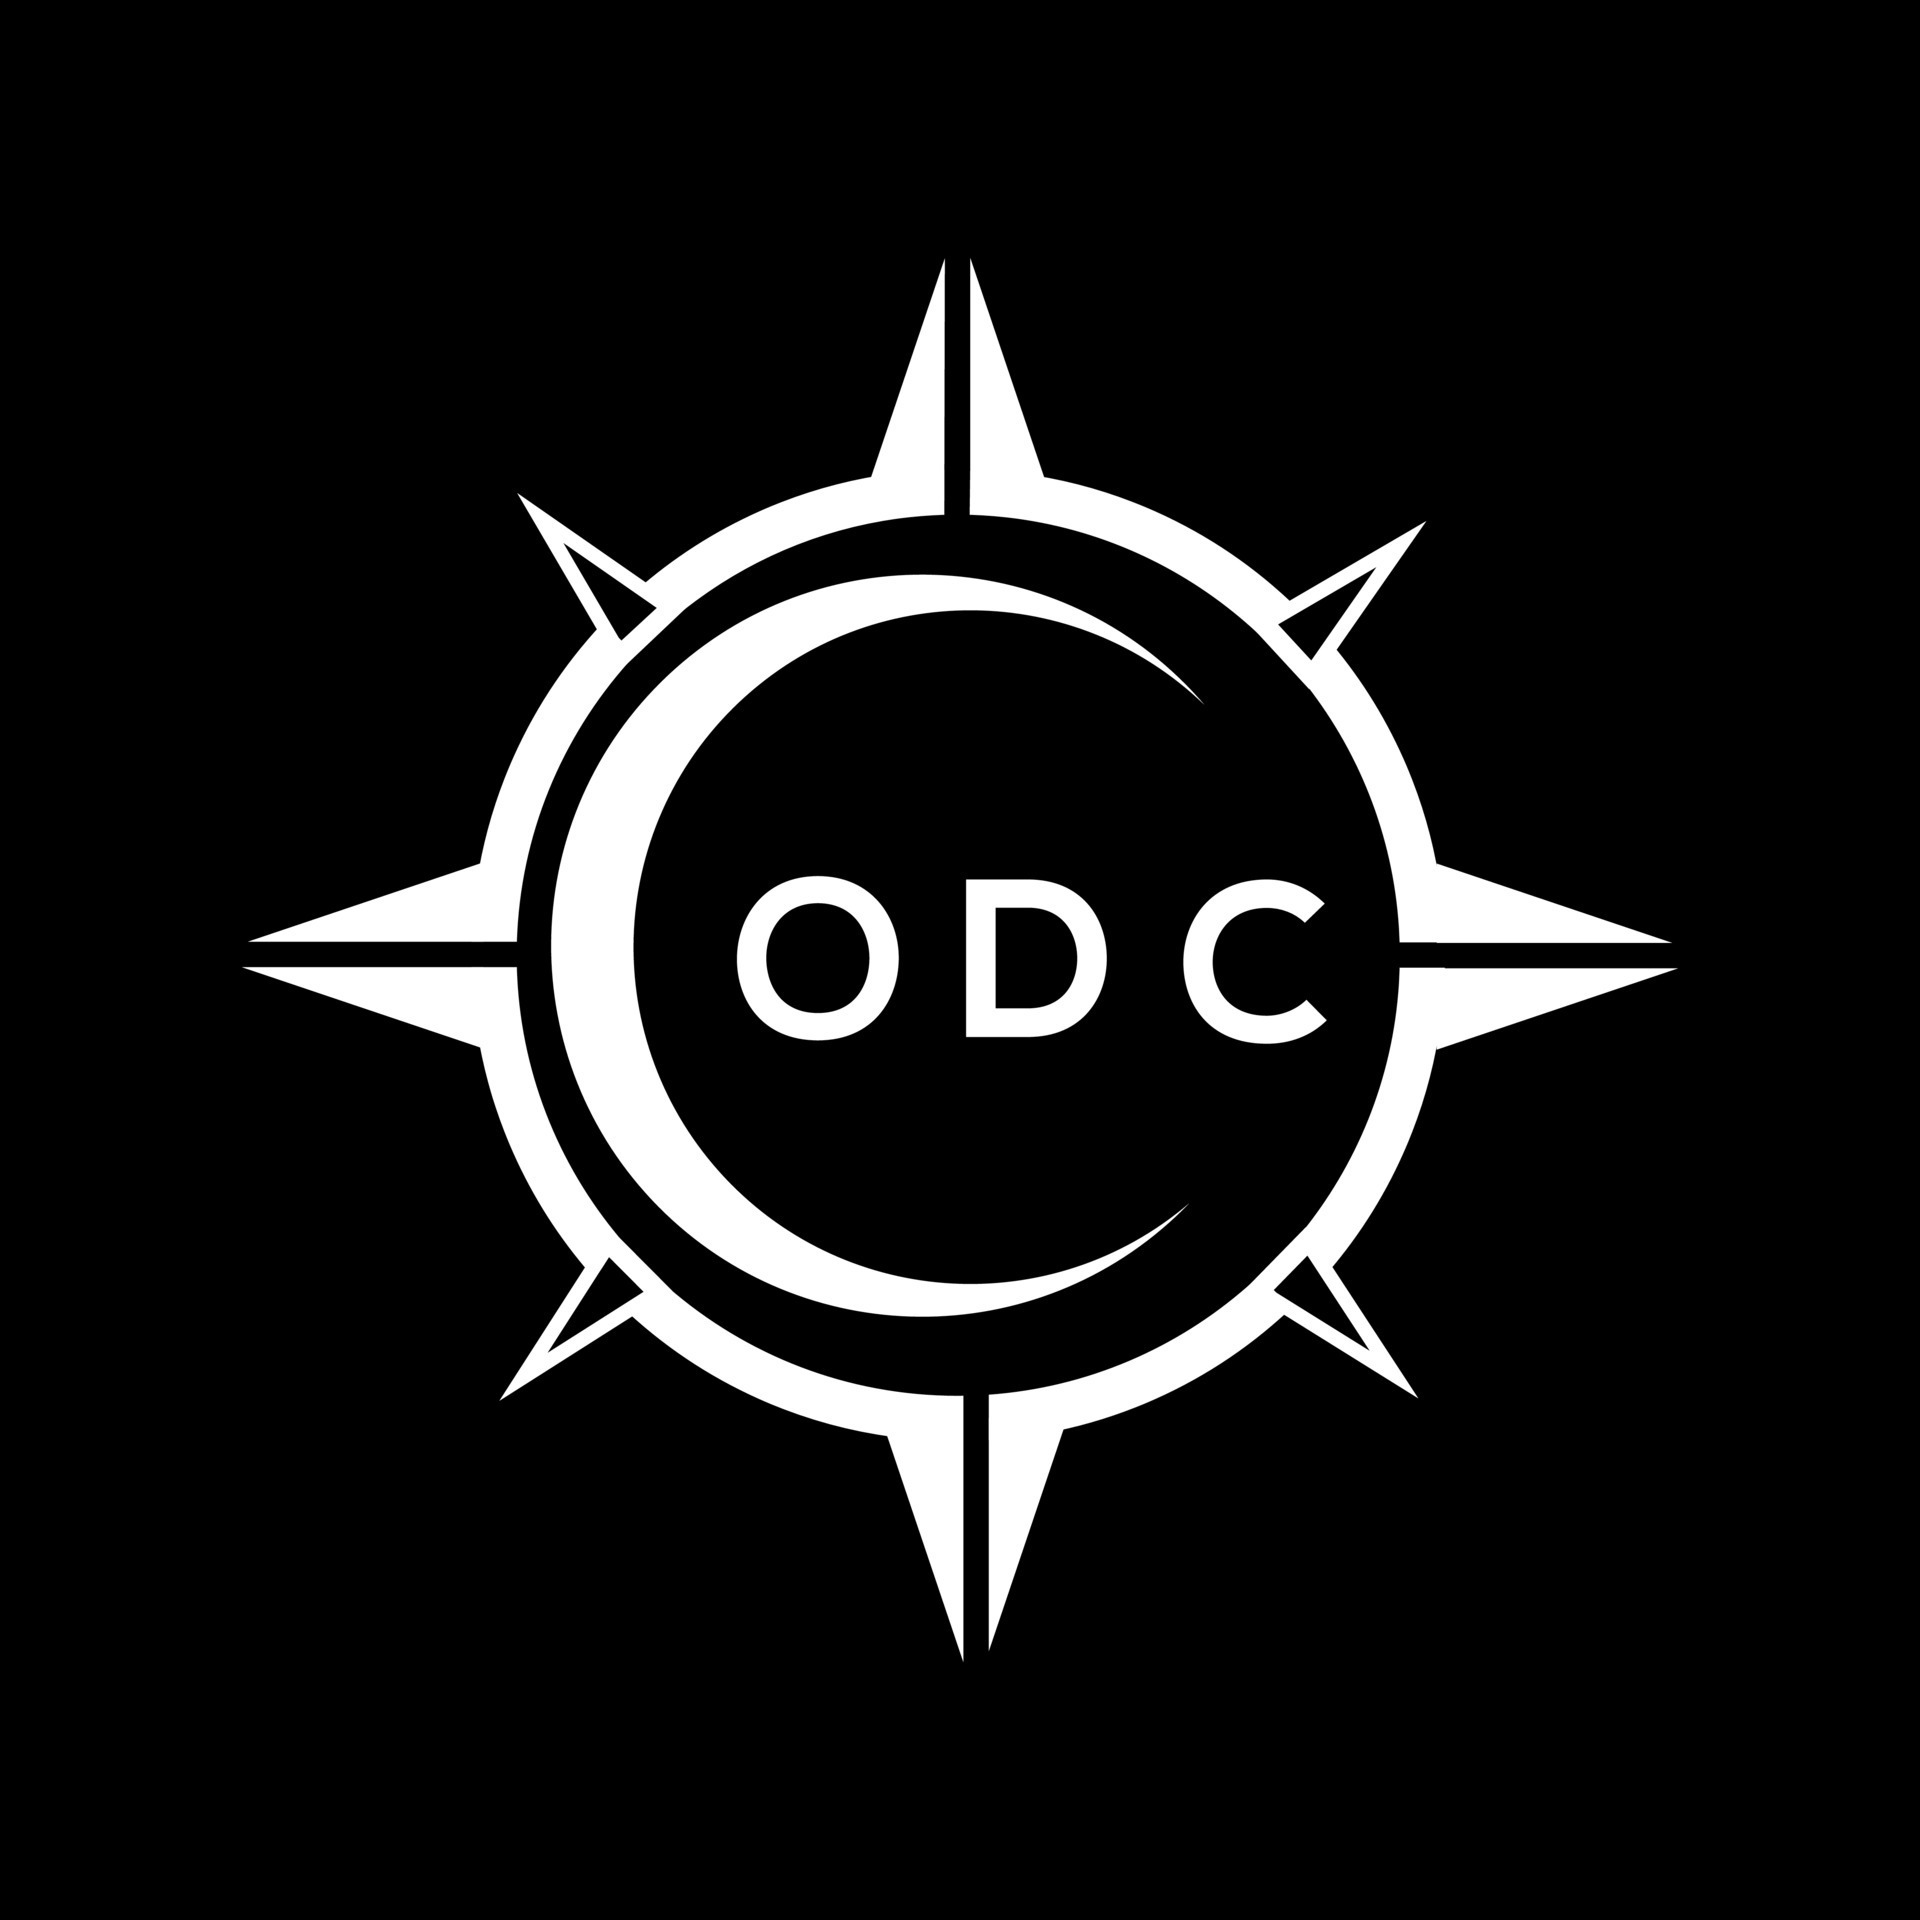 odc-abstract-technology-circle-setting-logo-design-on-black-background-odc-creative-initials-letter-logo-vector